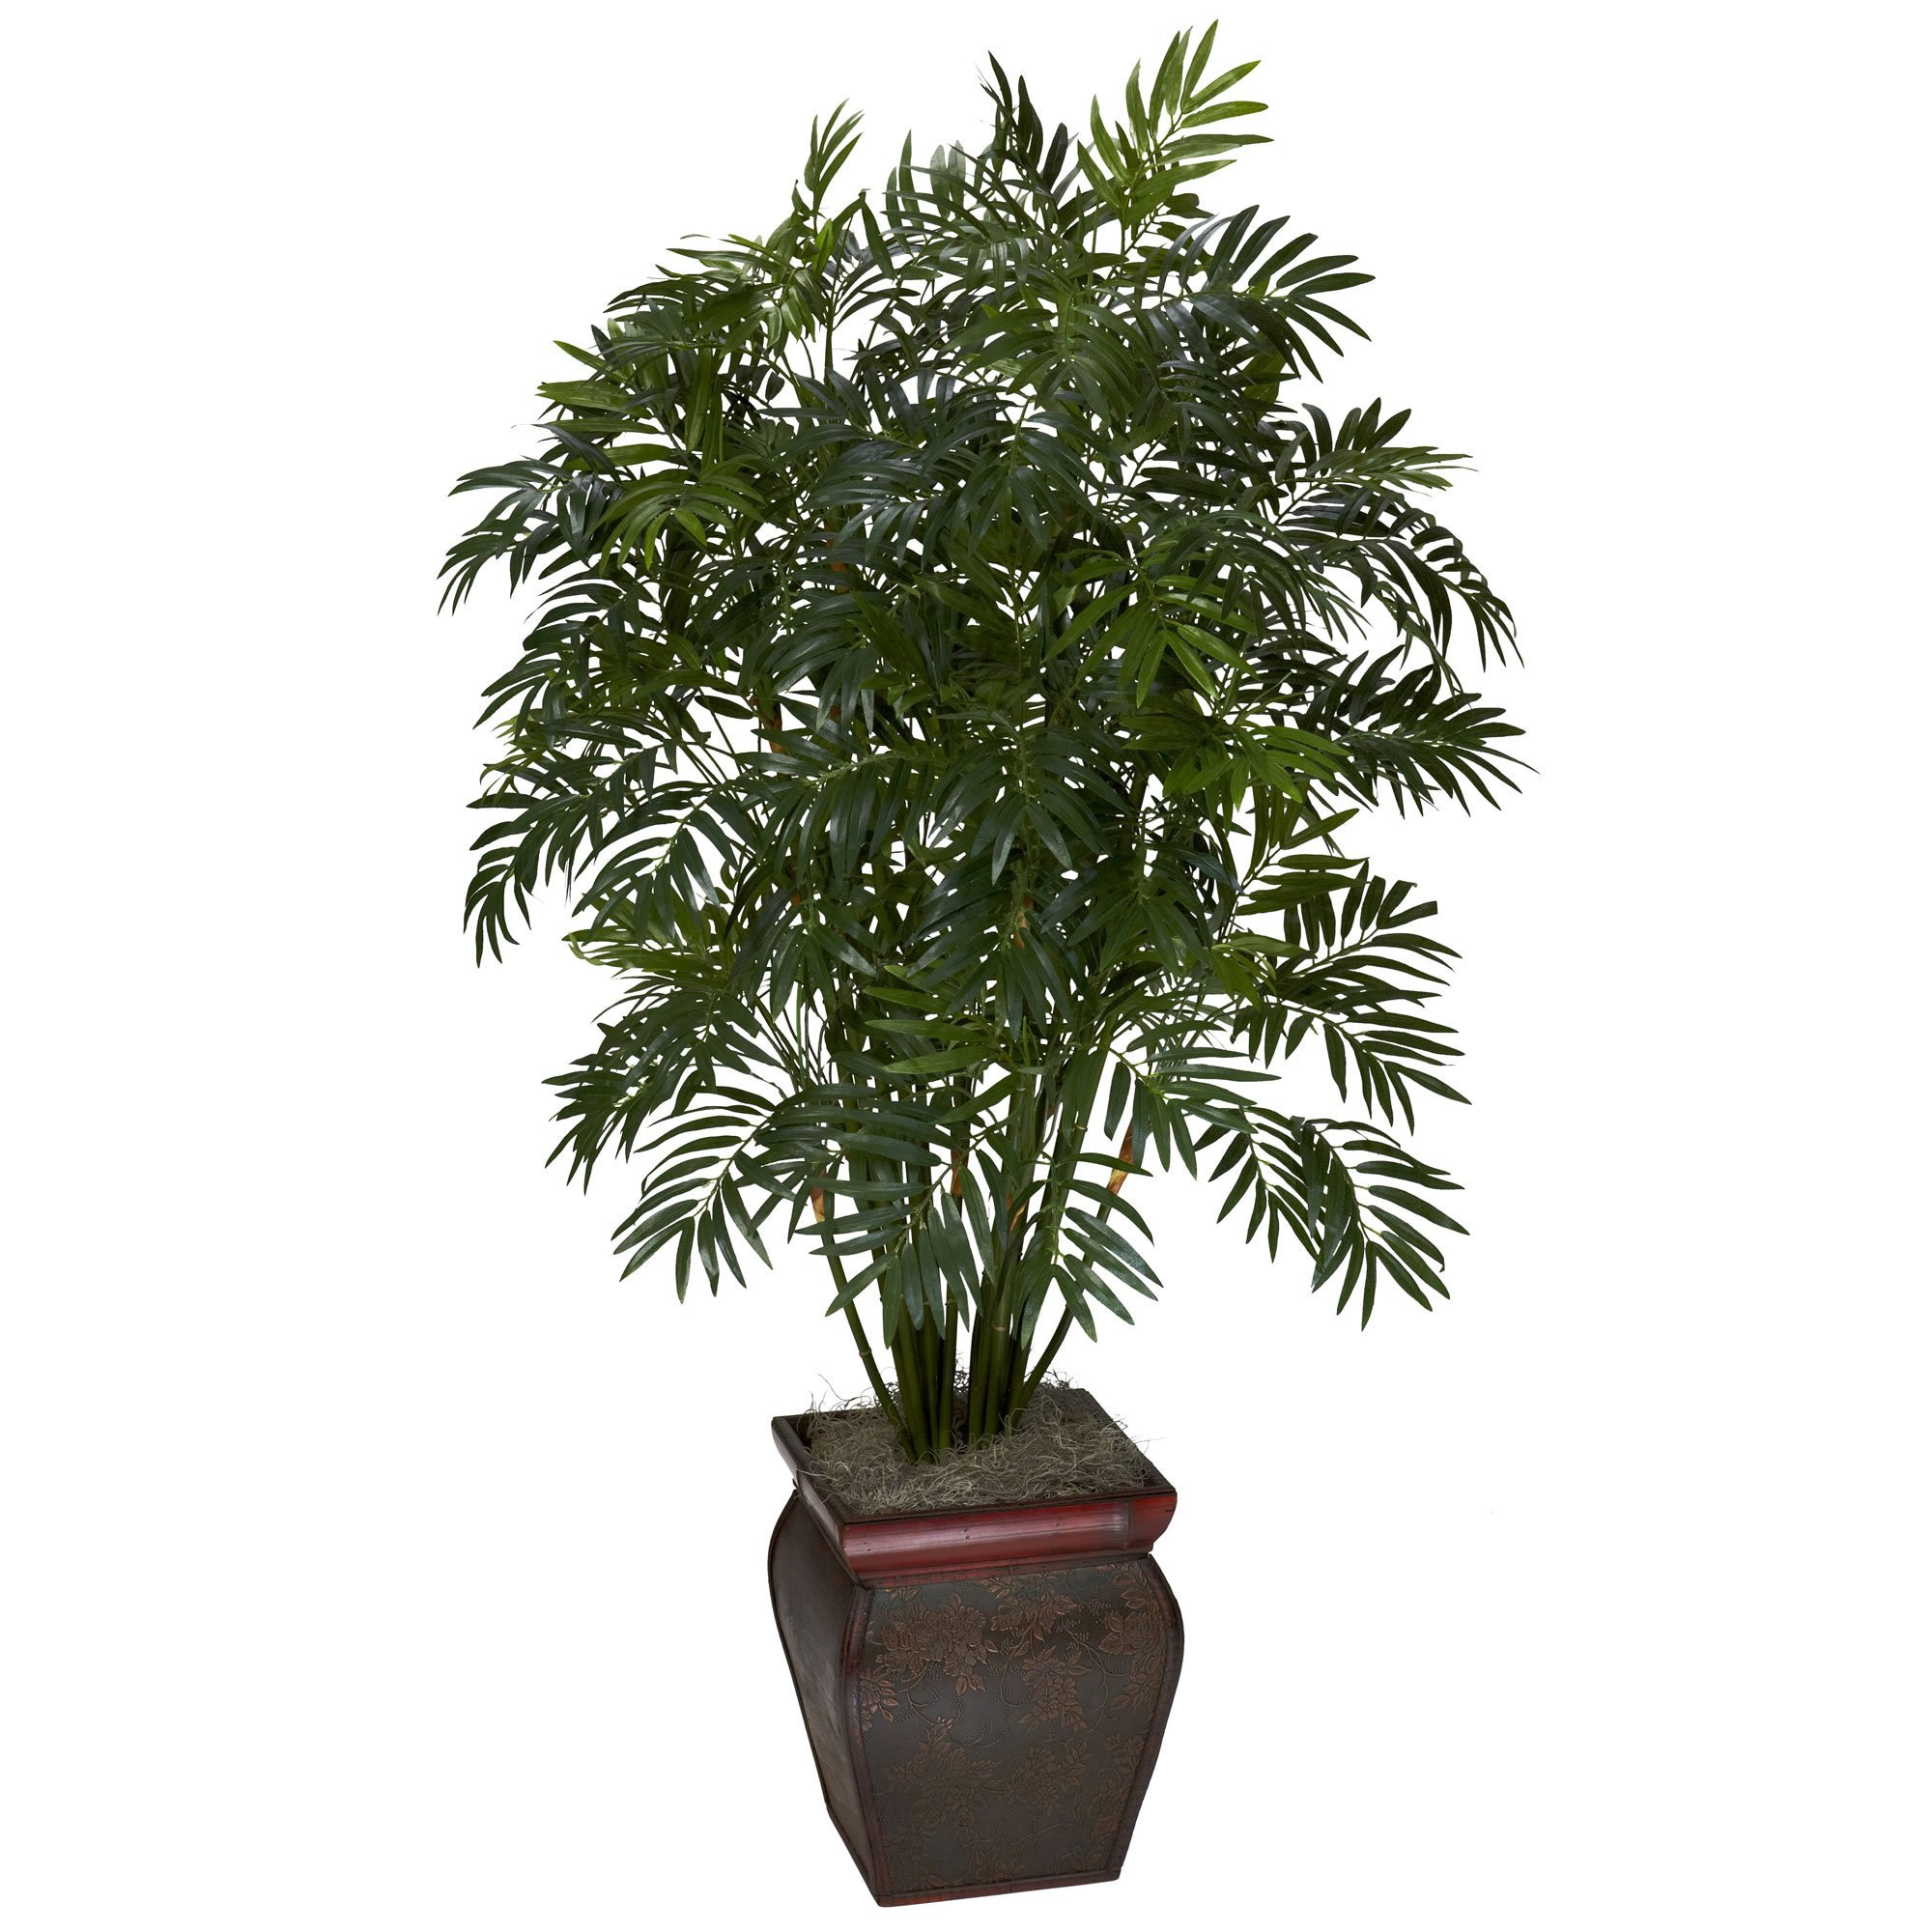 29 Perfect Bamboo Flower Vase 2024 free download bamboo flower vase of artificial trees home depot trend mini bamboo palm w decorative vase for artificial trees home depot trend mini bamboo palm w decorative vase